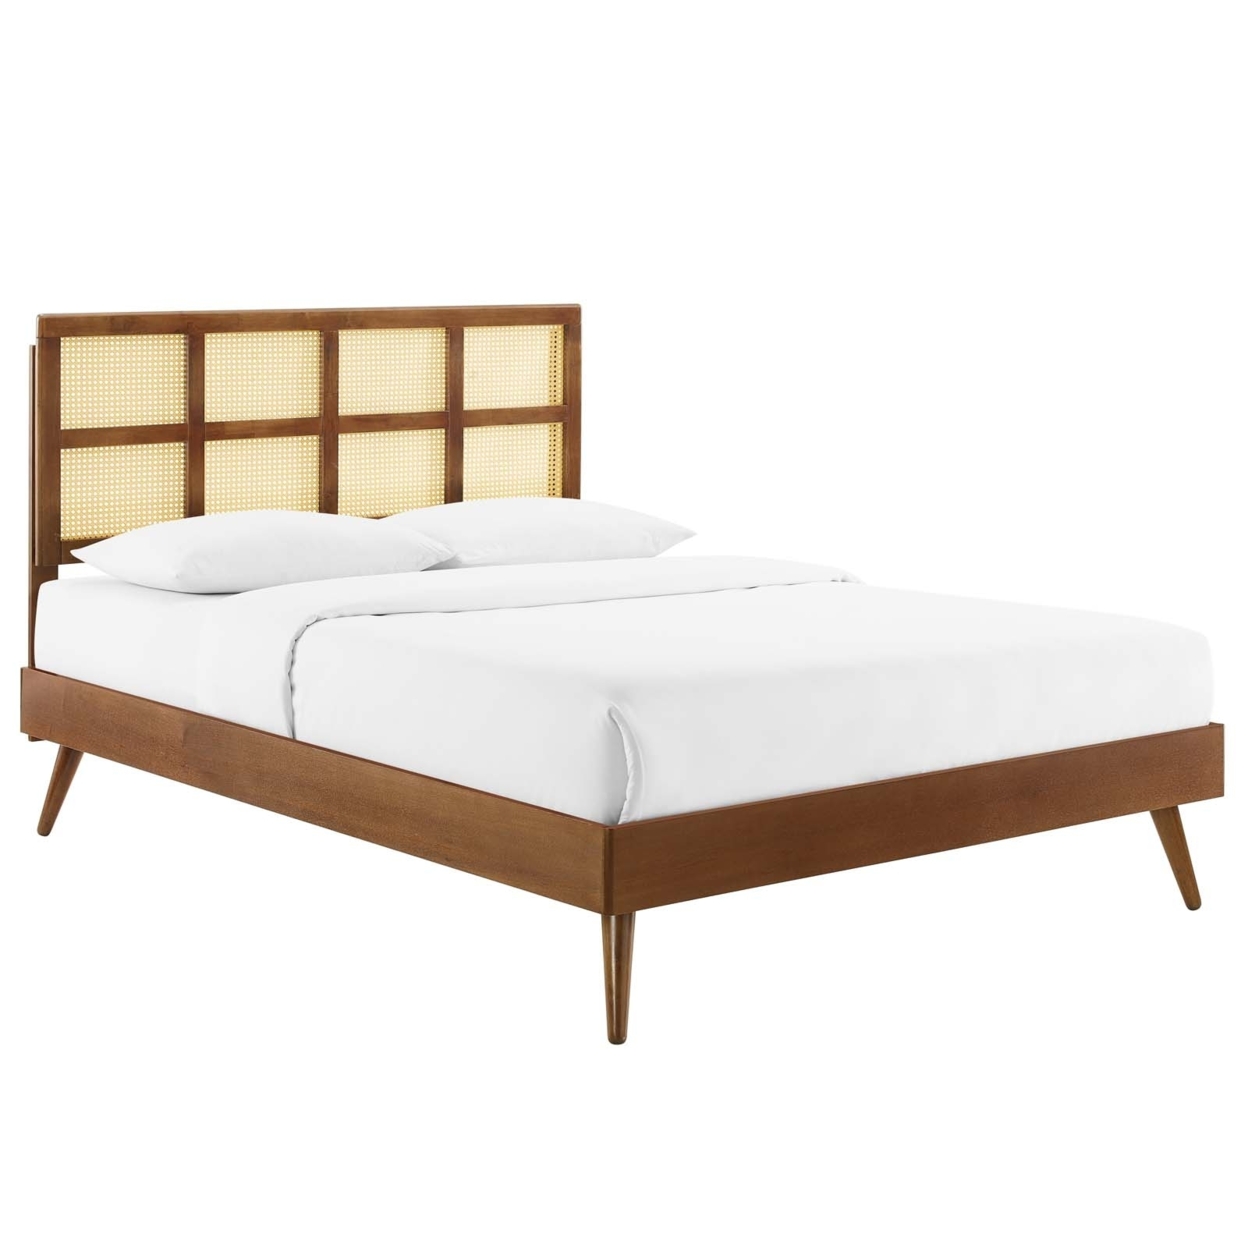 Sidney Cane And Wood Full Platform Bed With Splayed Legs, Walnut